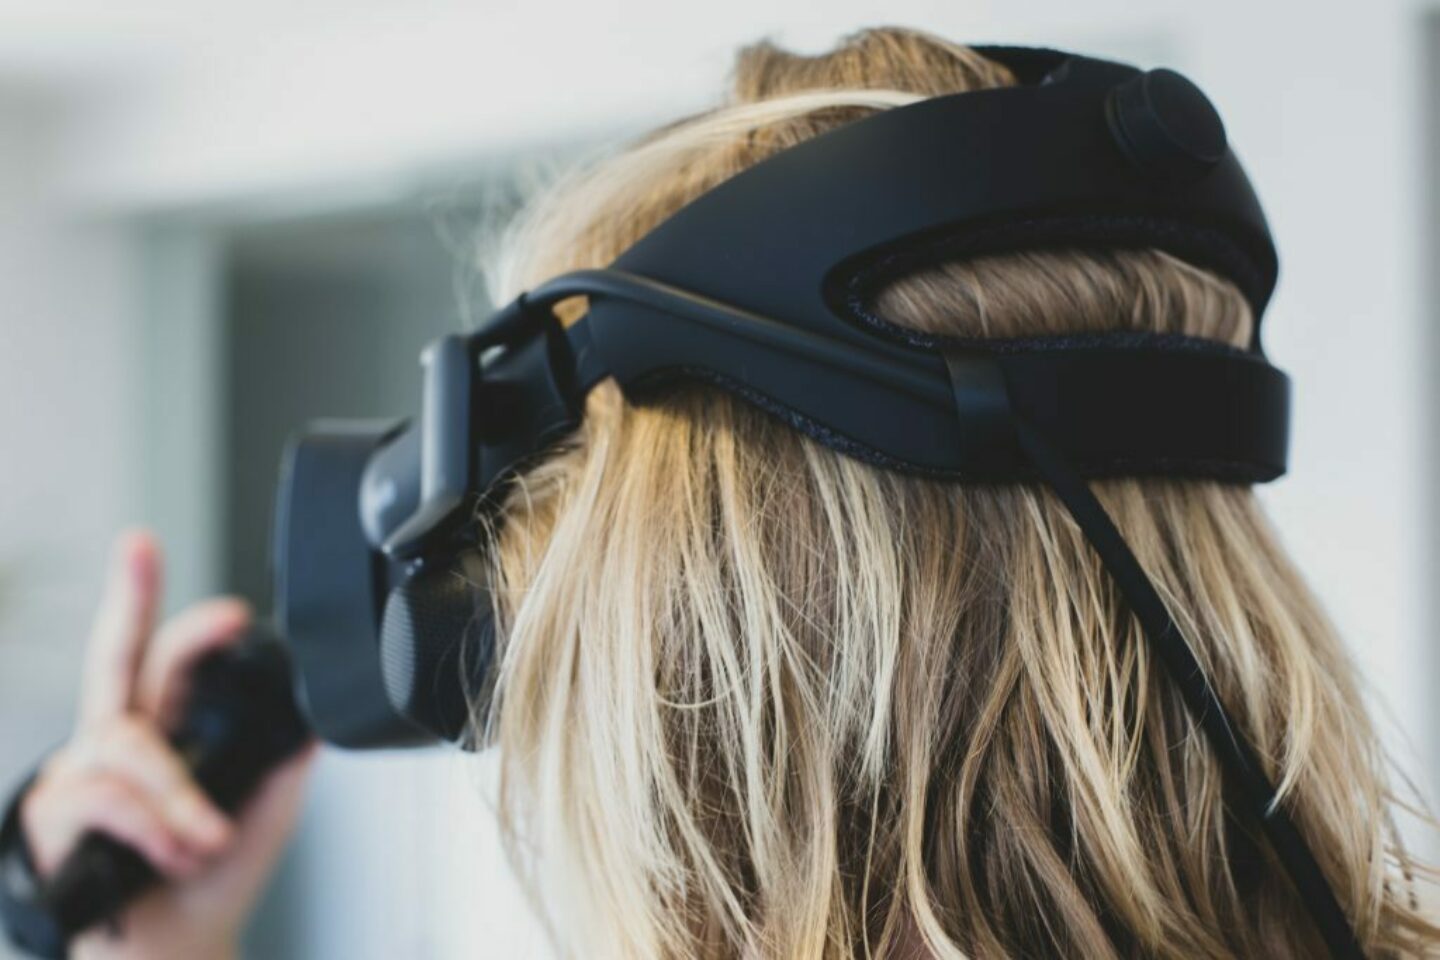 Valve Index: the best VR headset for the more demanding applications?